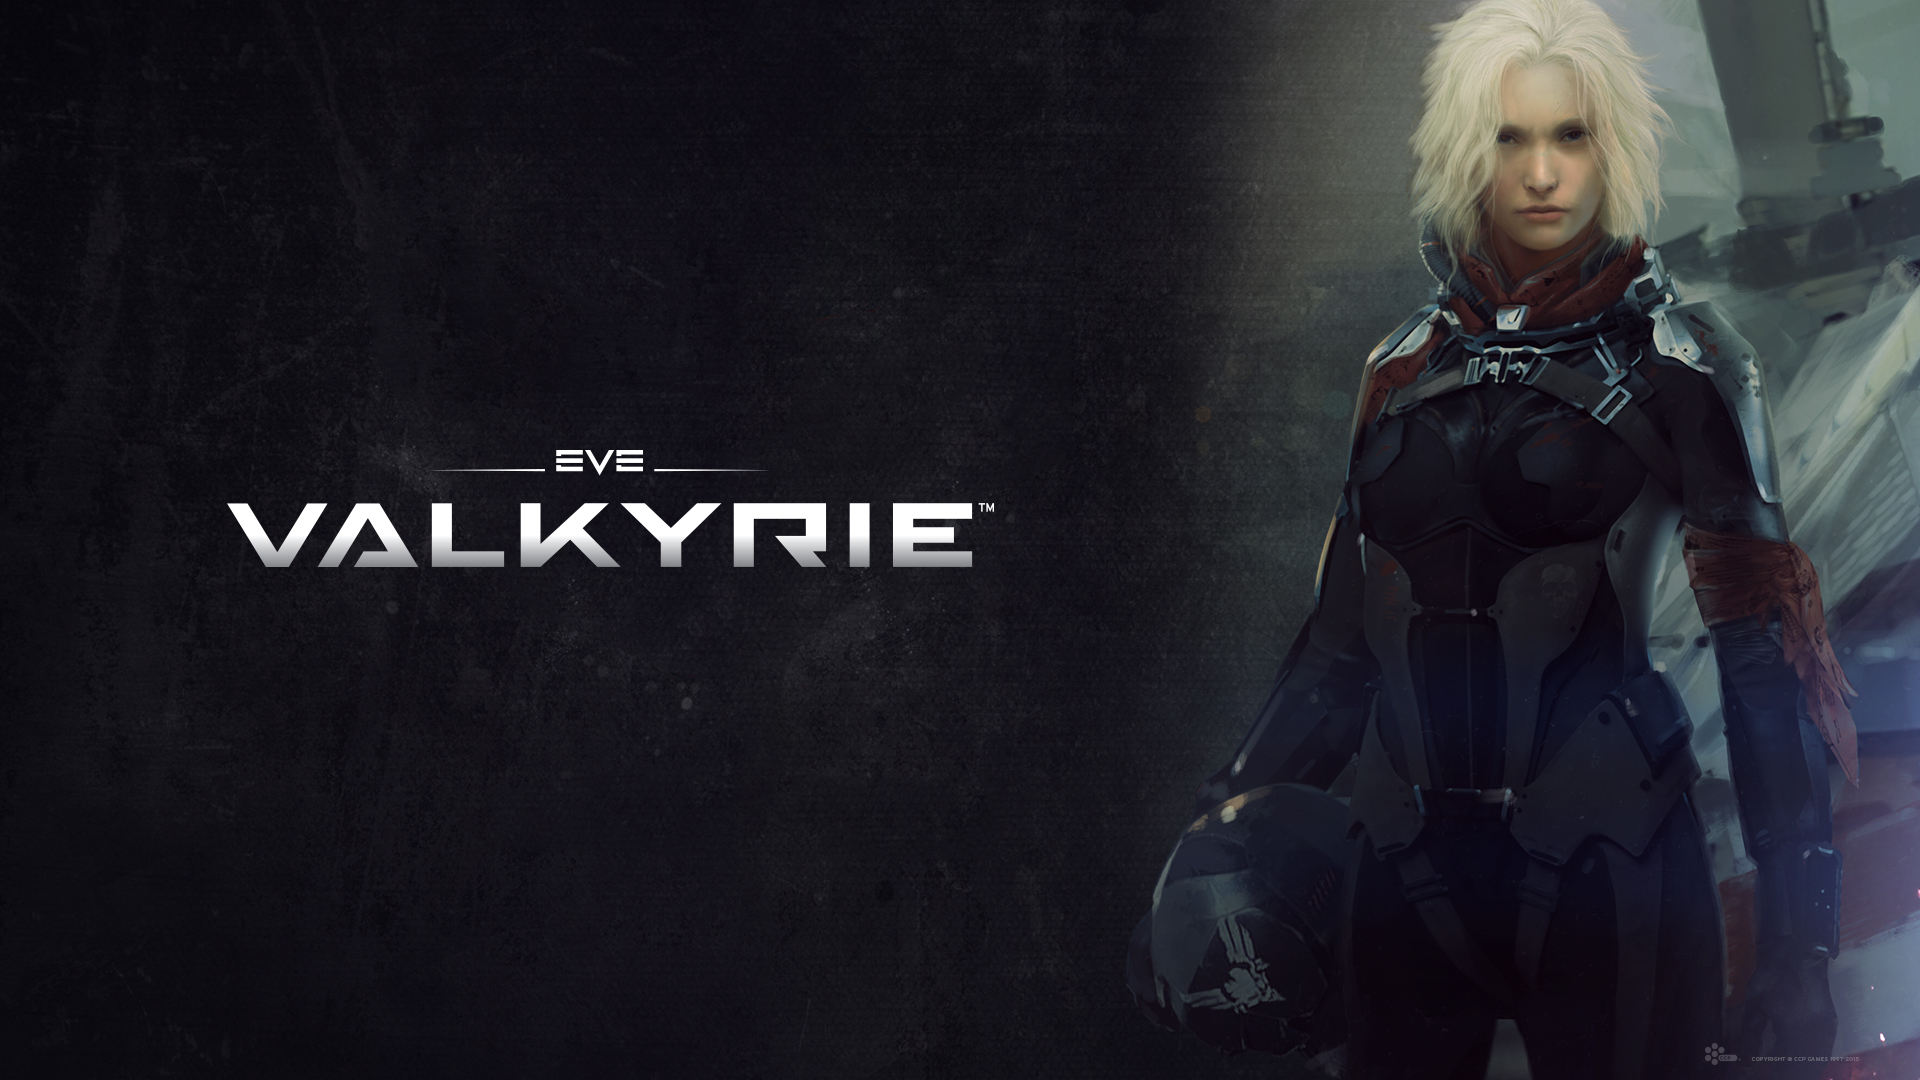 Valkyrie Hd Wallpapers